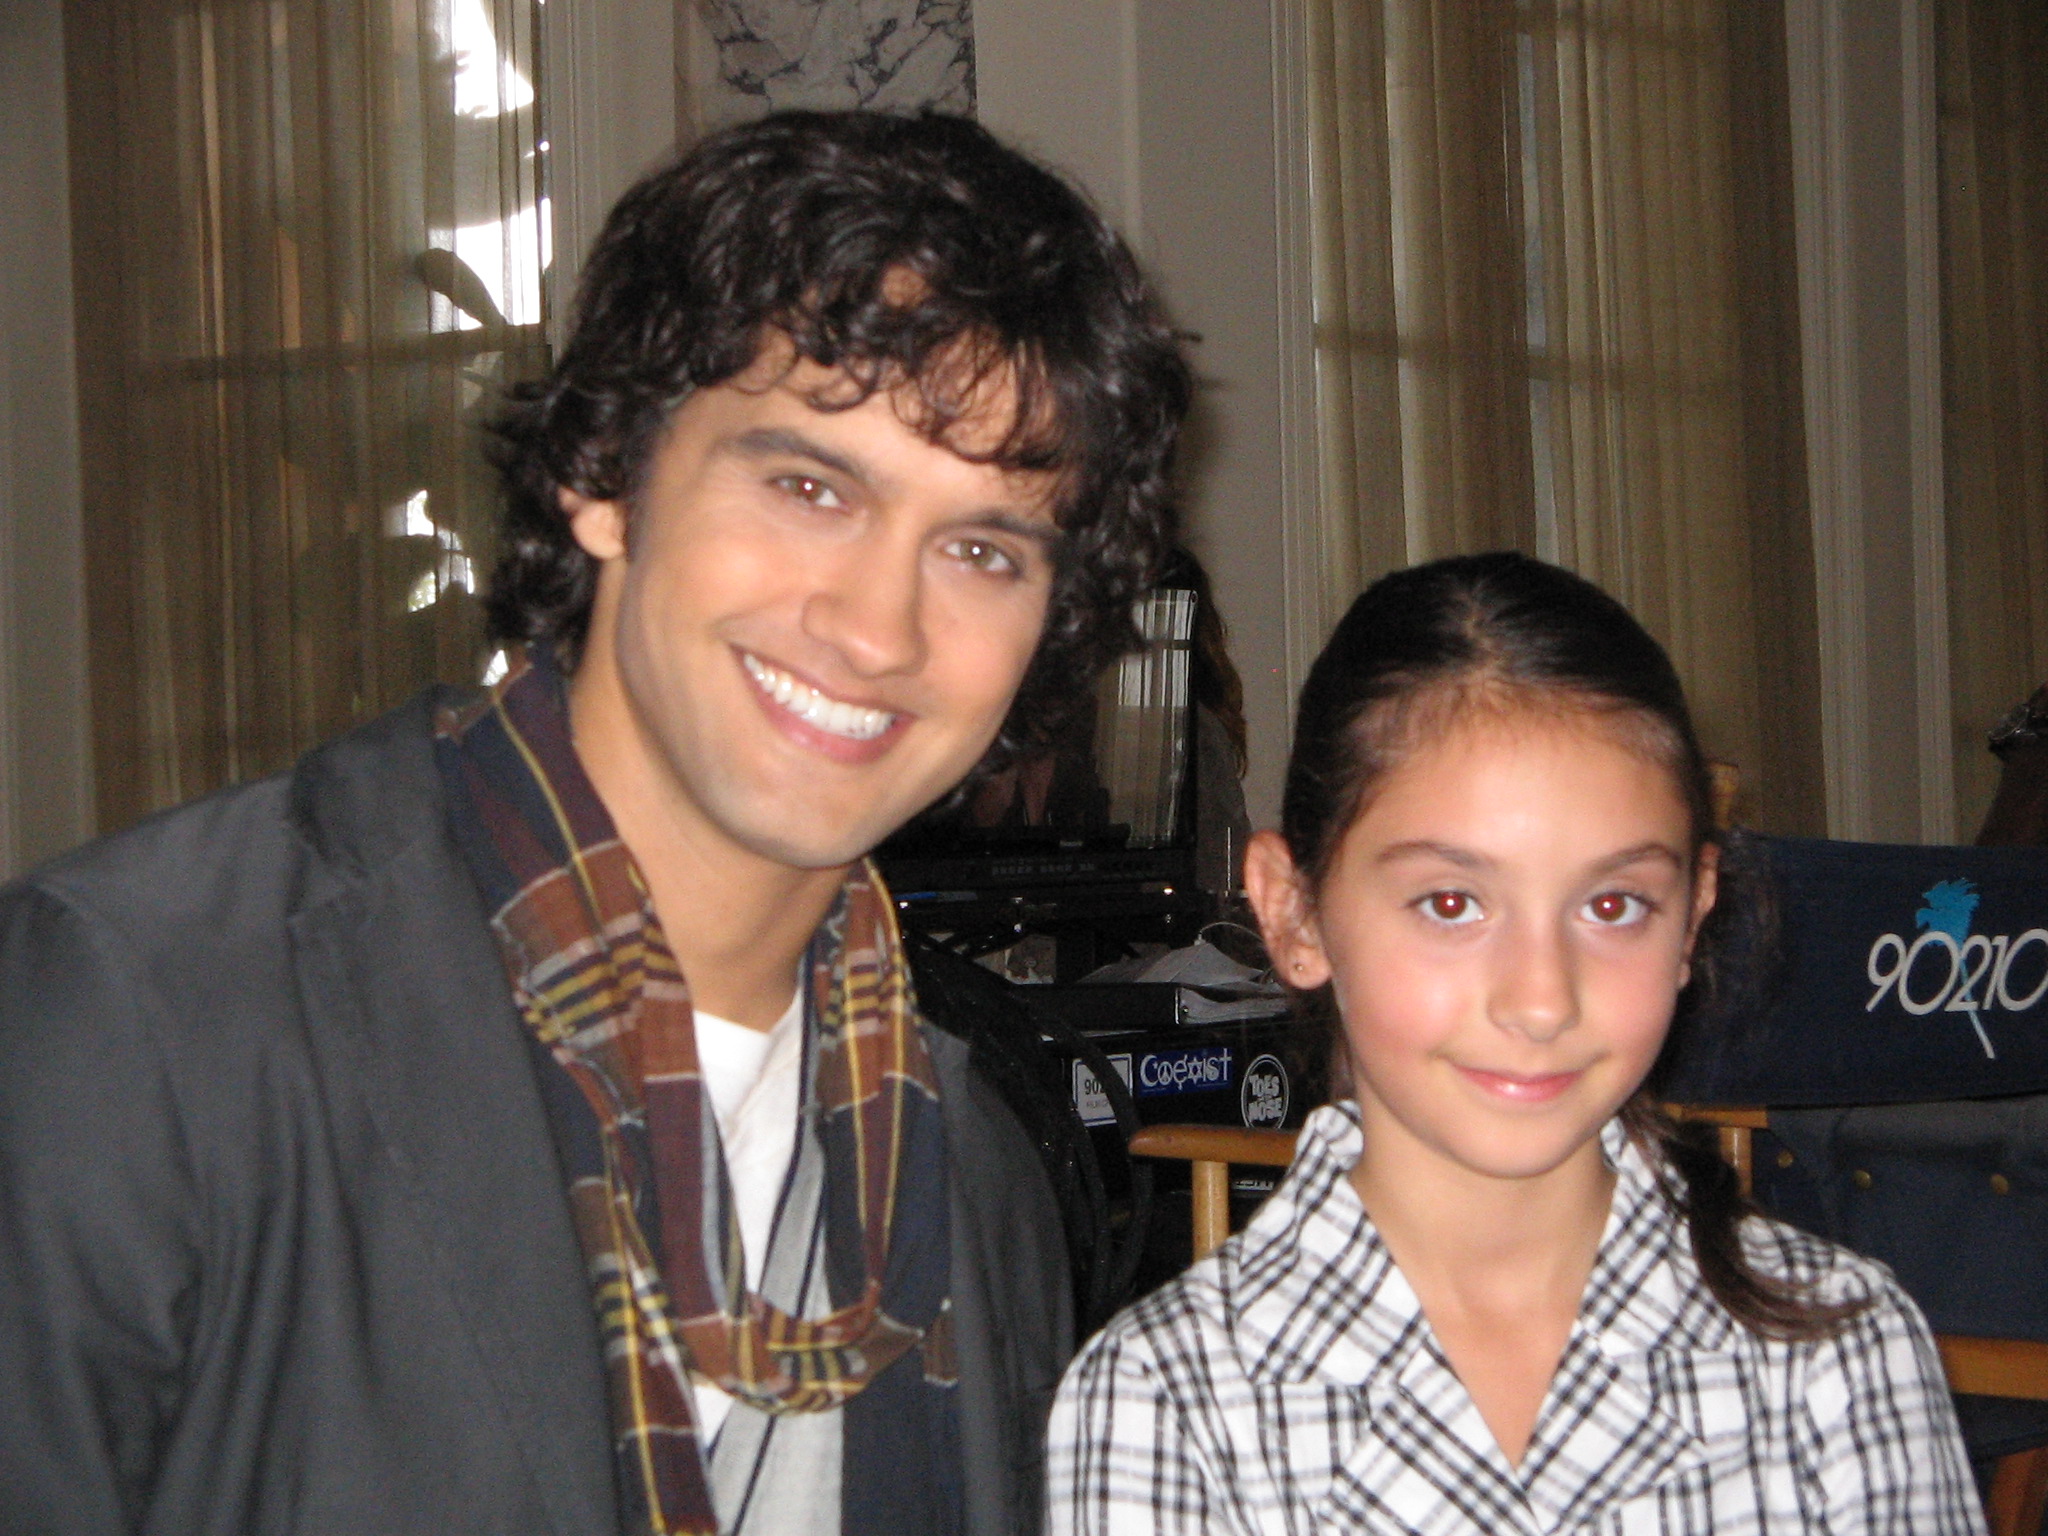 On The Set of 90210 with Michael Steger